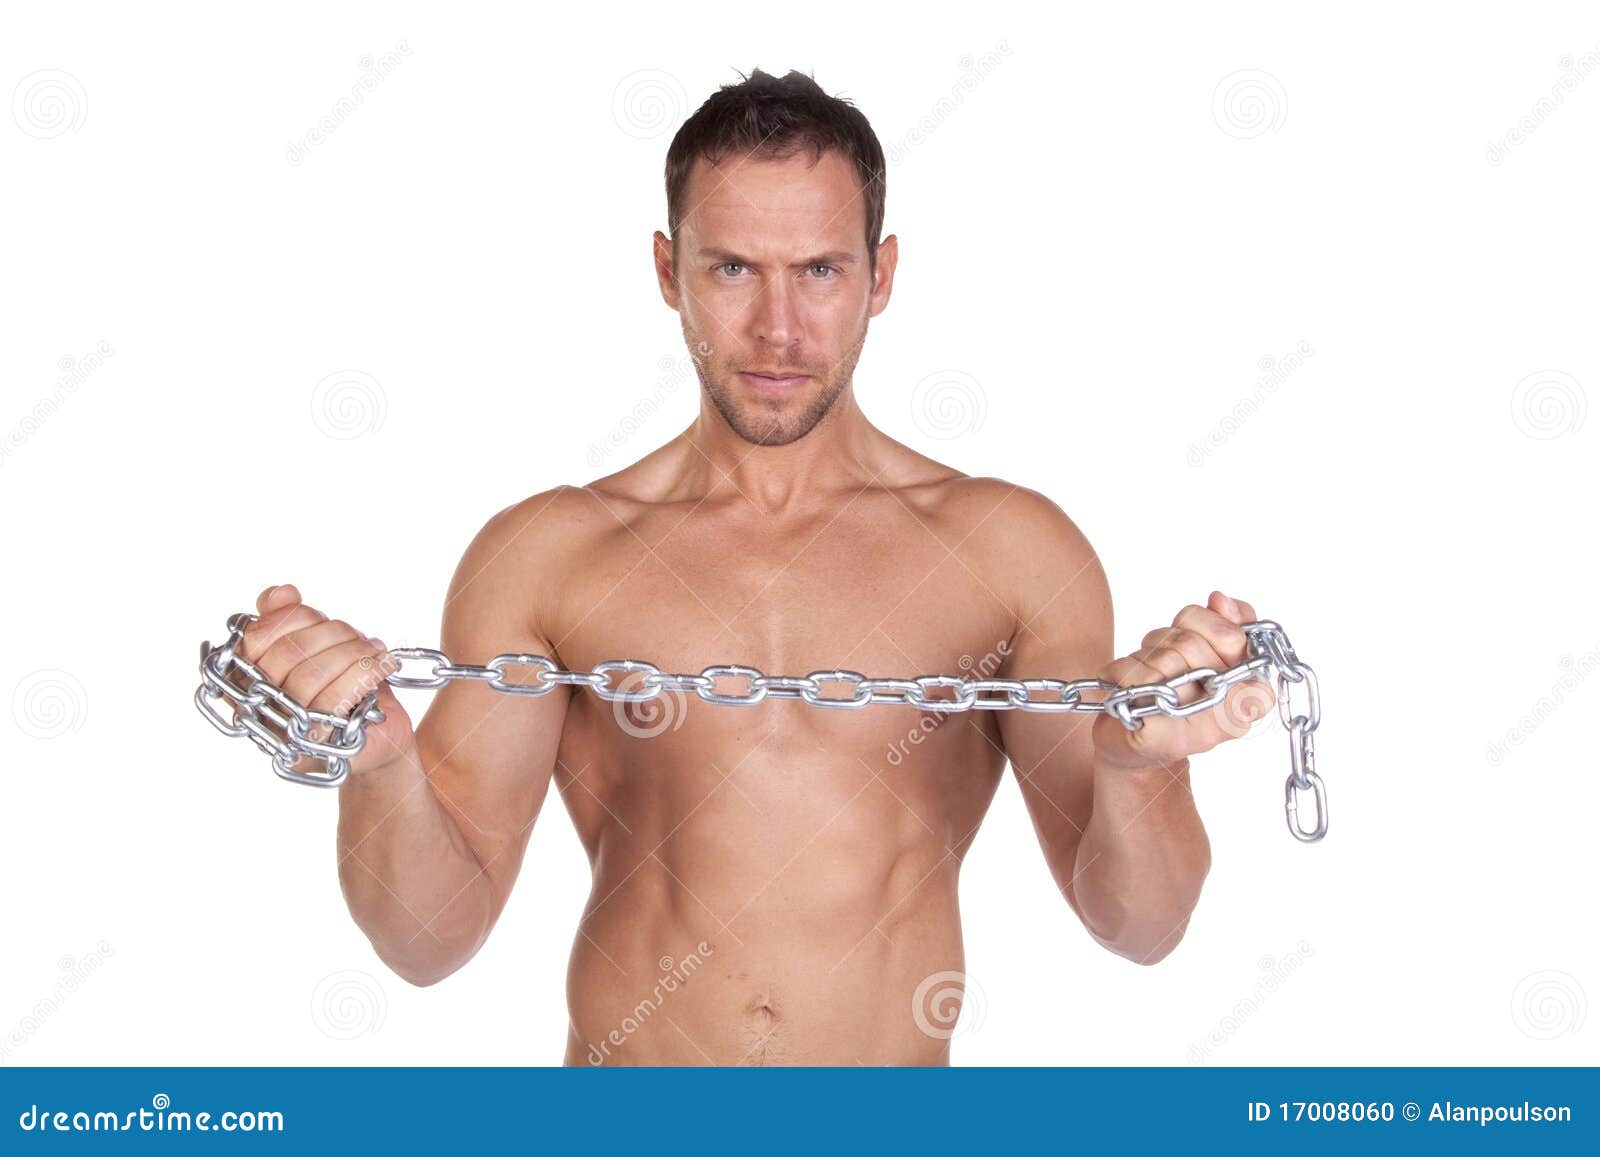 Chained Muscle Gallery Main